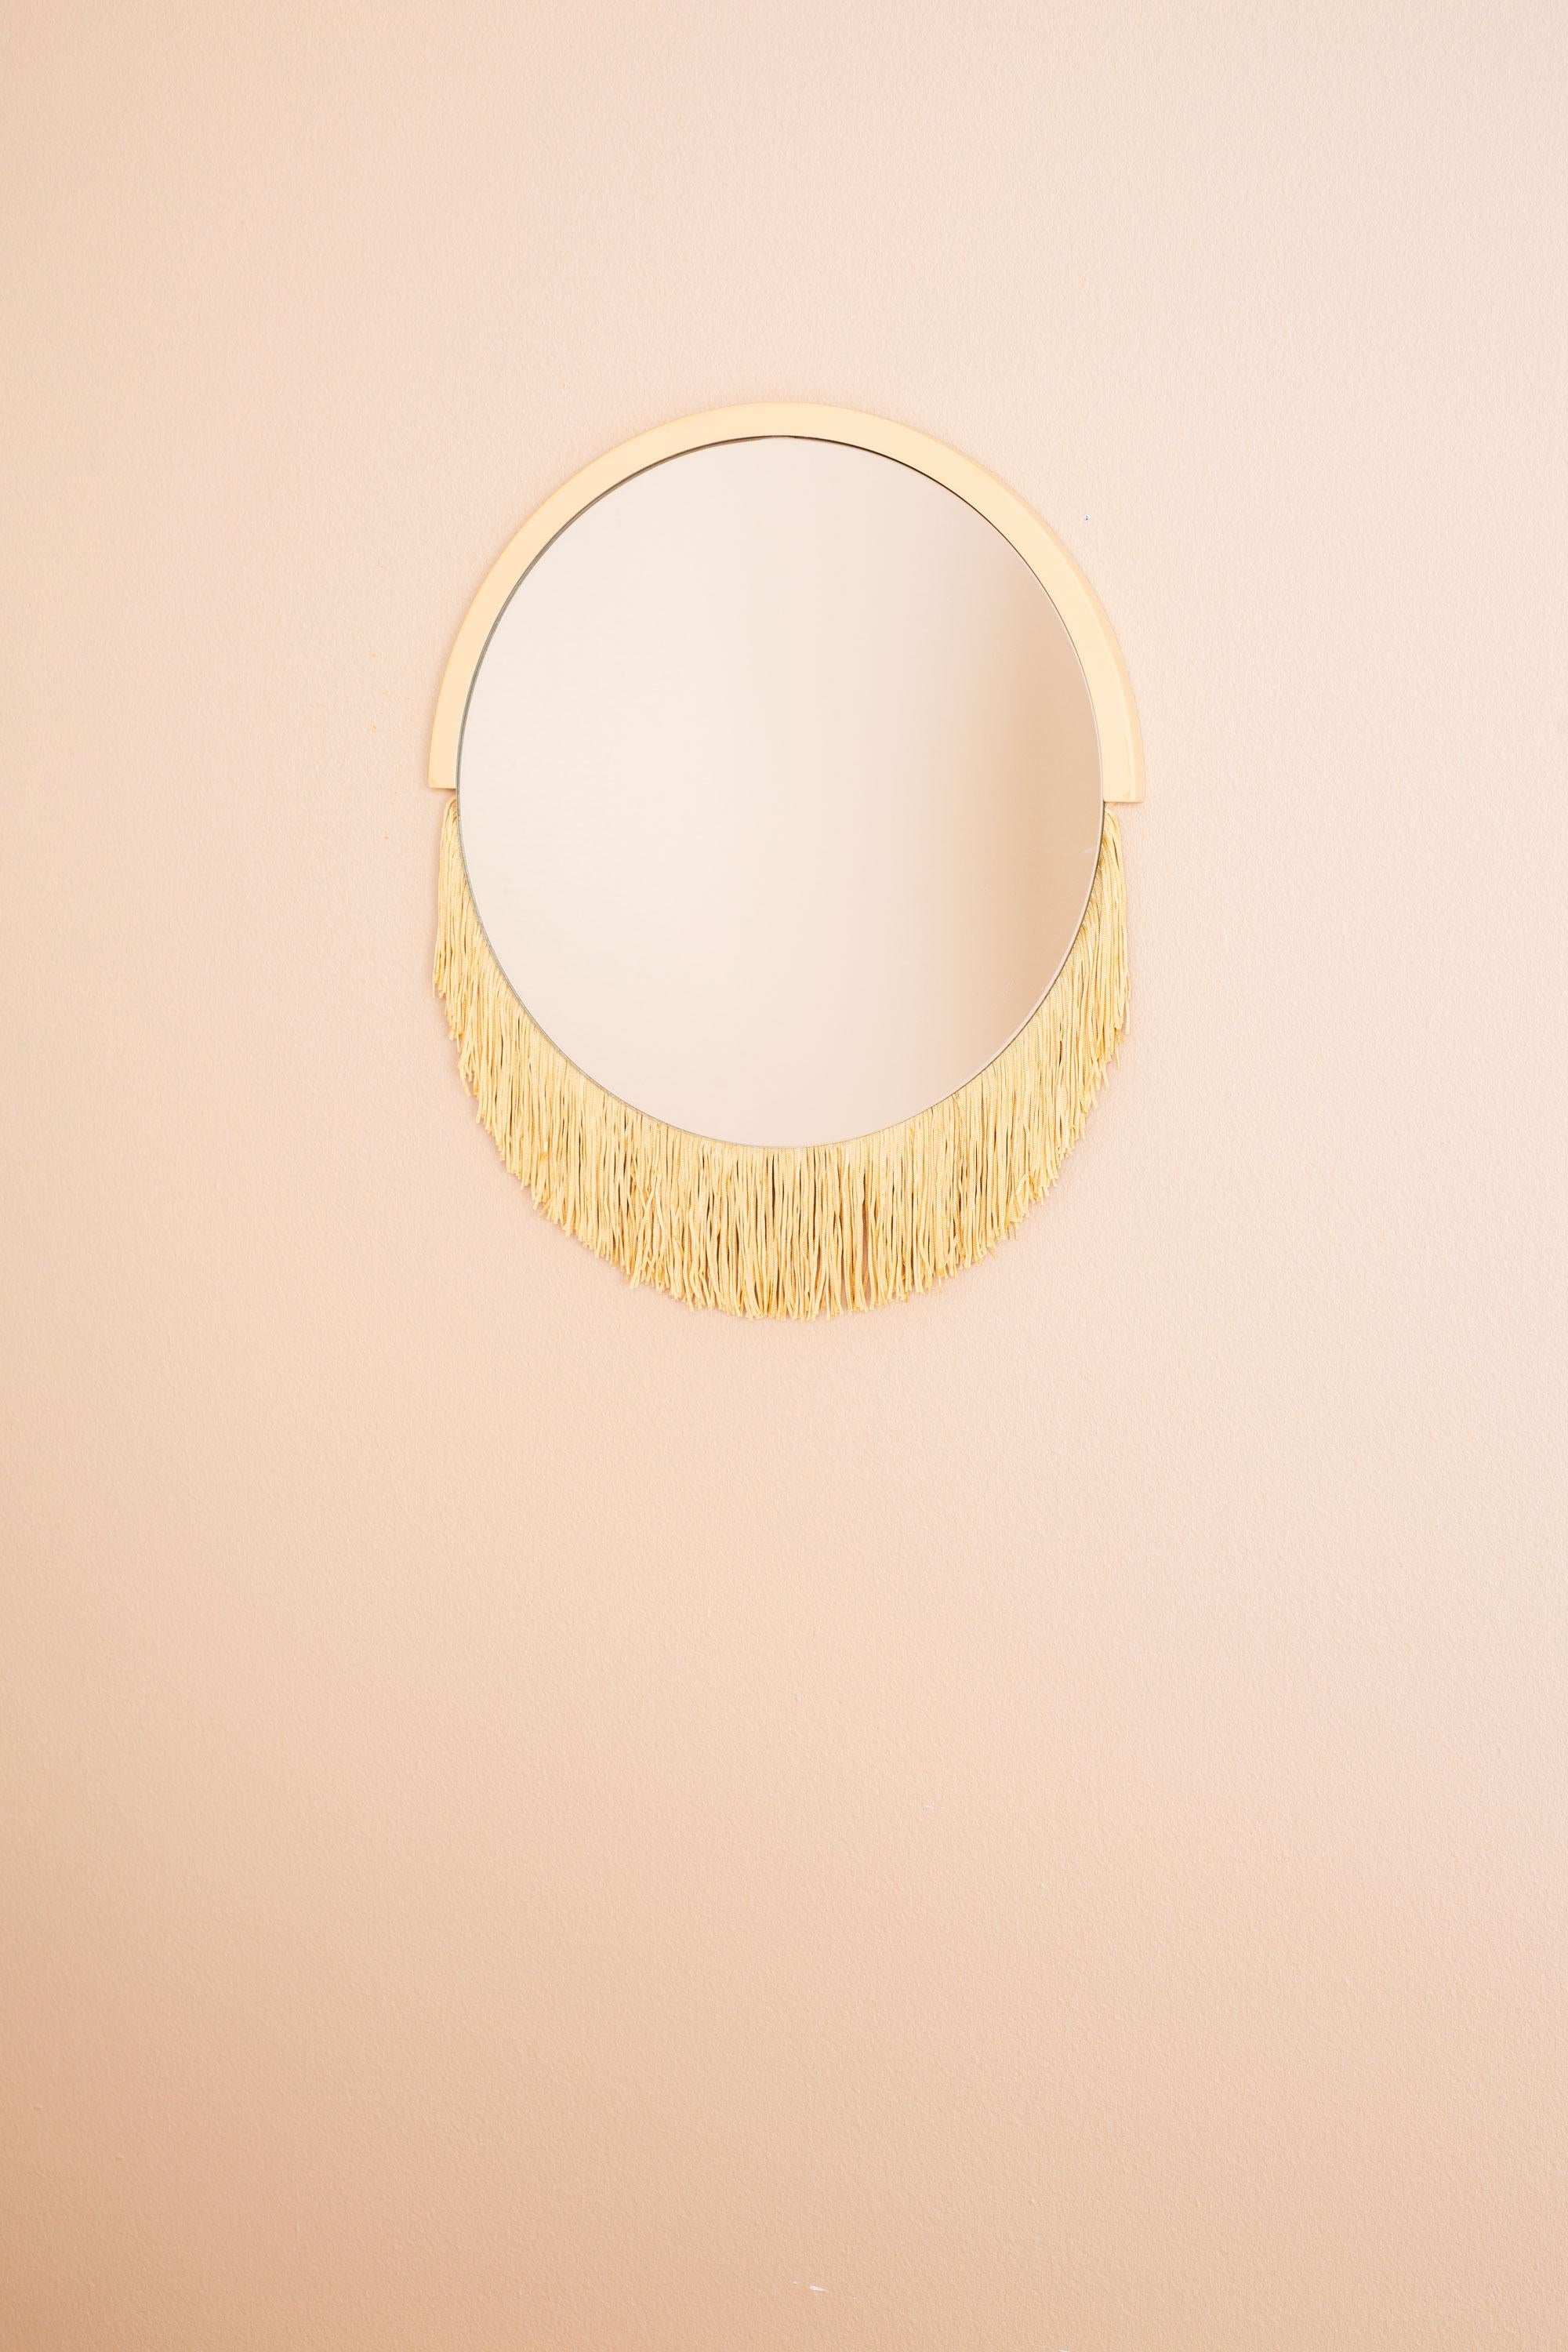 Boudoir Small Wall Mirror by Tero Kuitunen For Sale 12